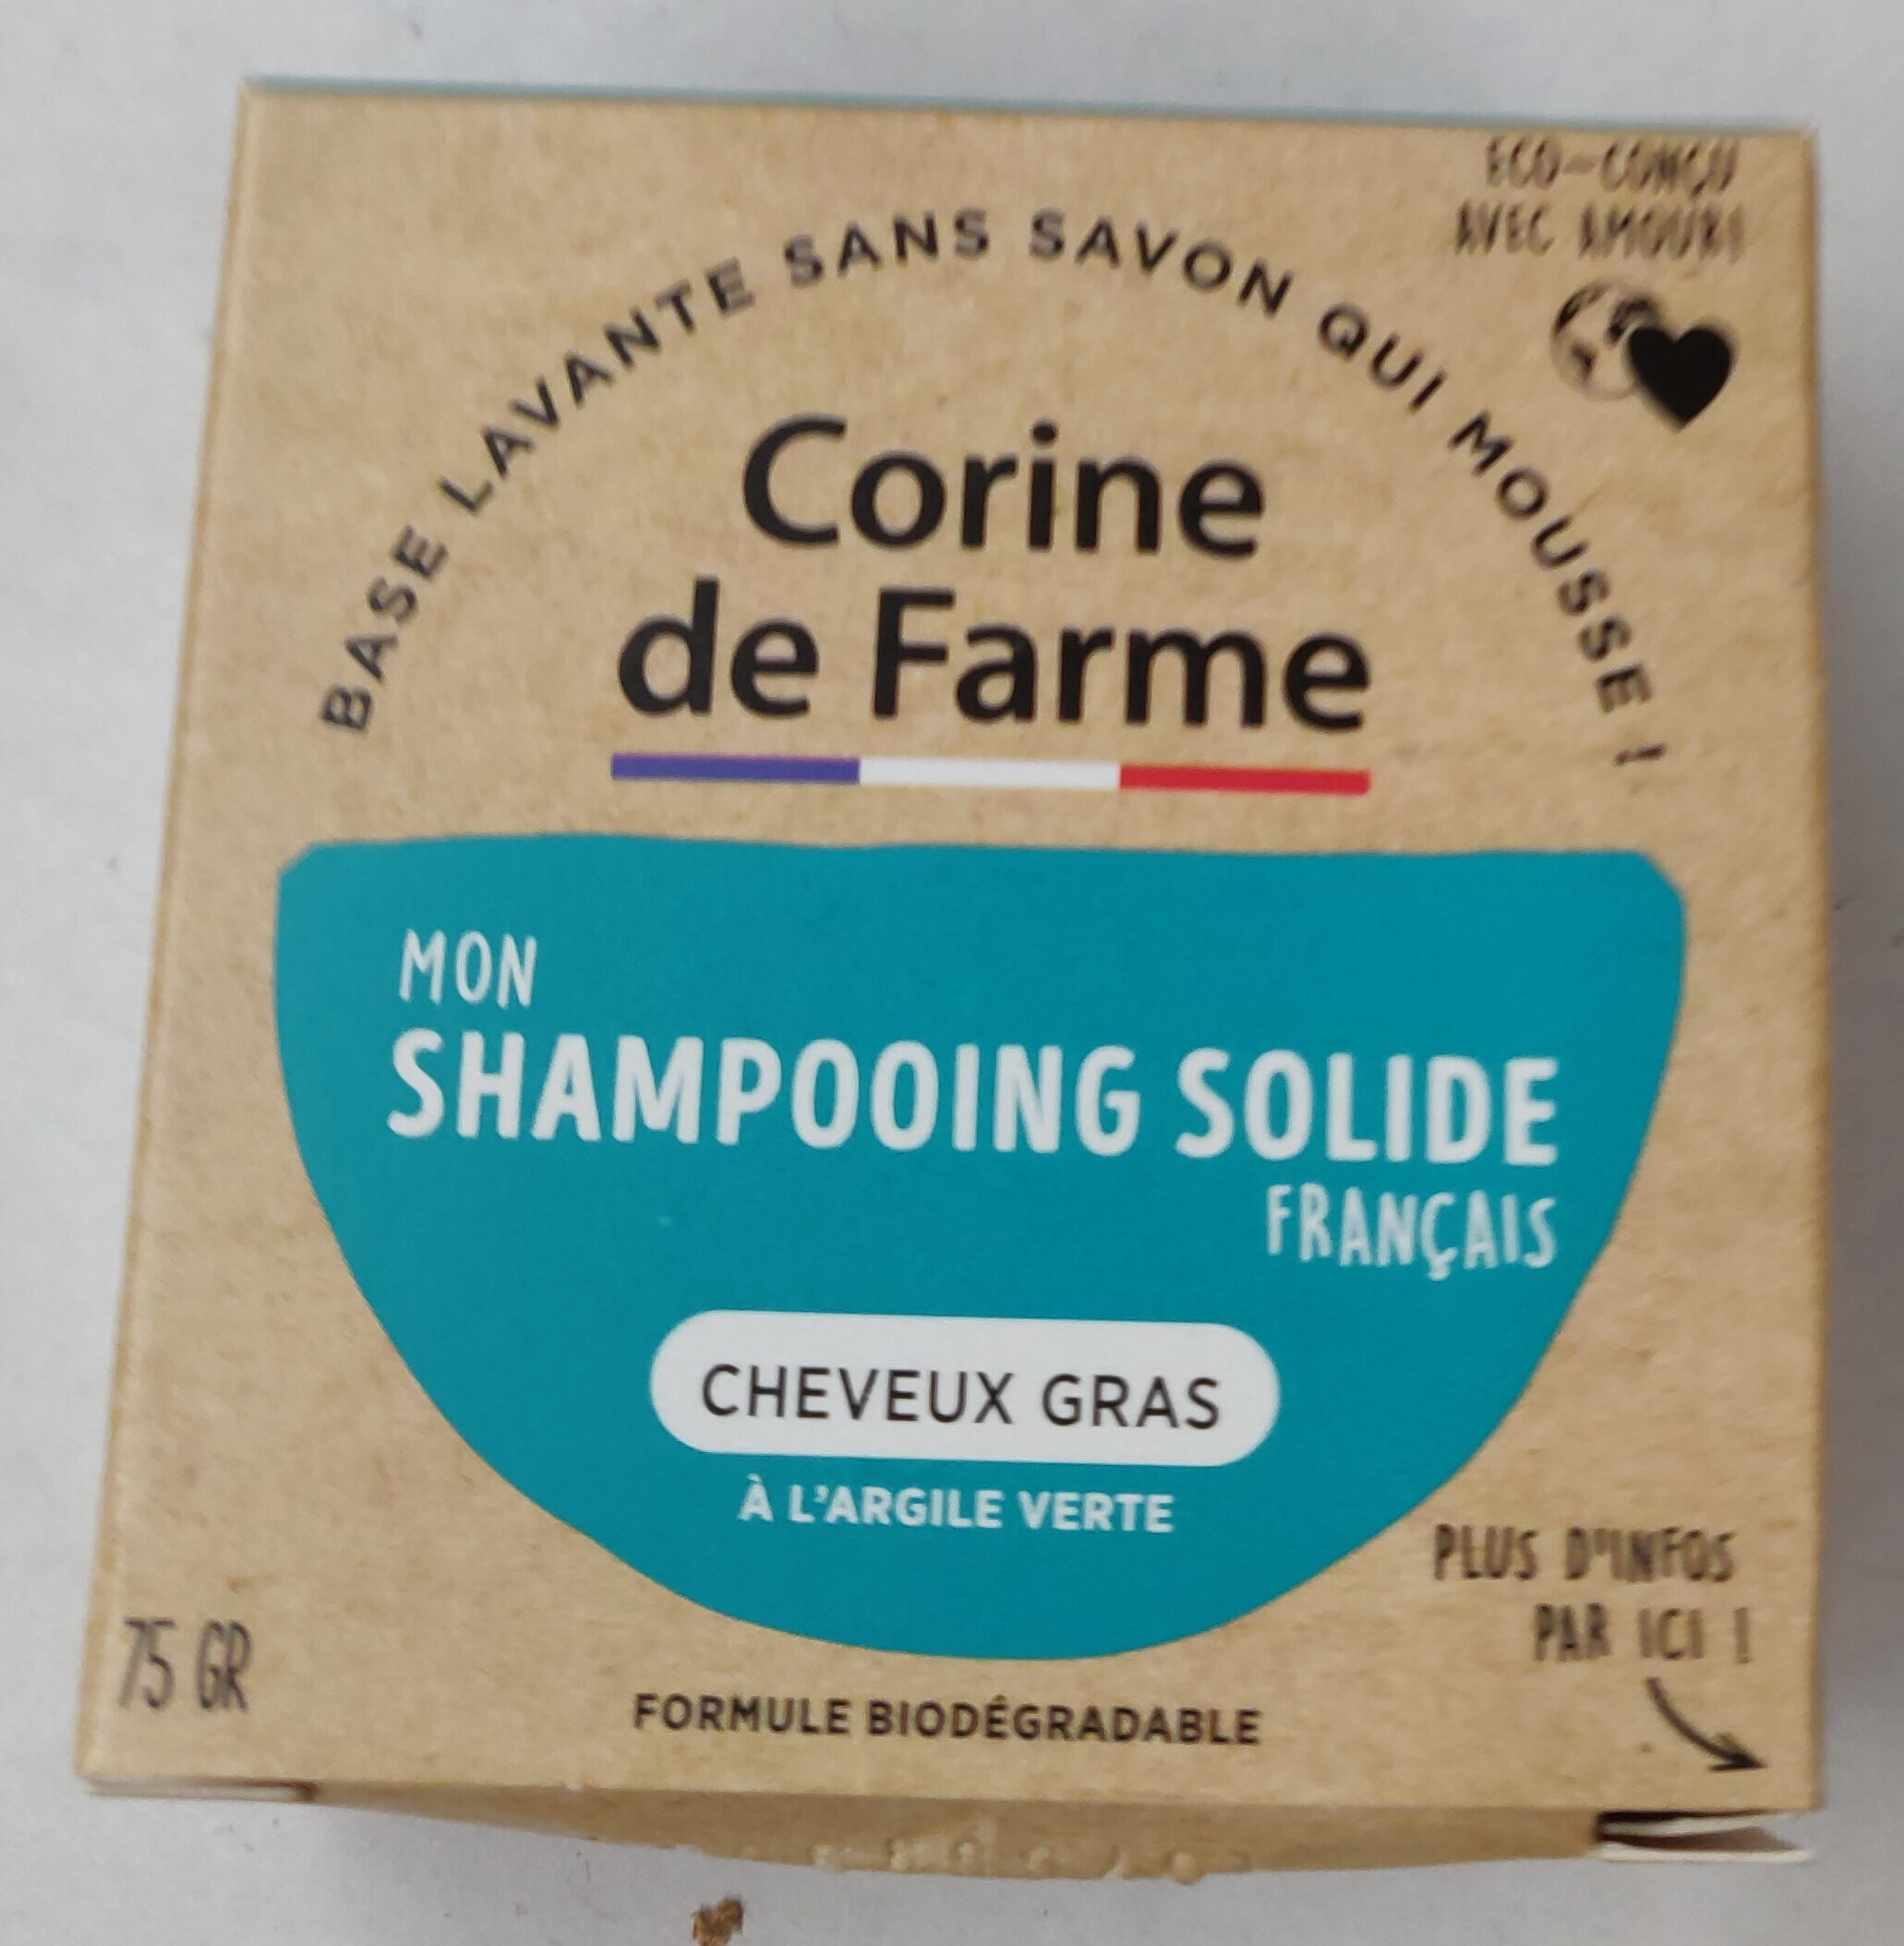 Shampooing solide - Product - fr